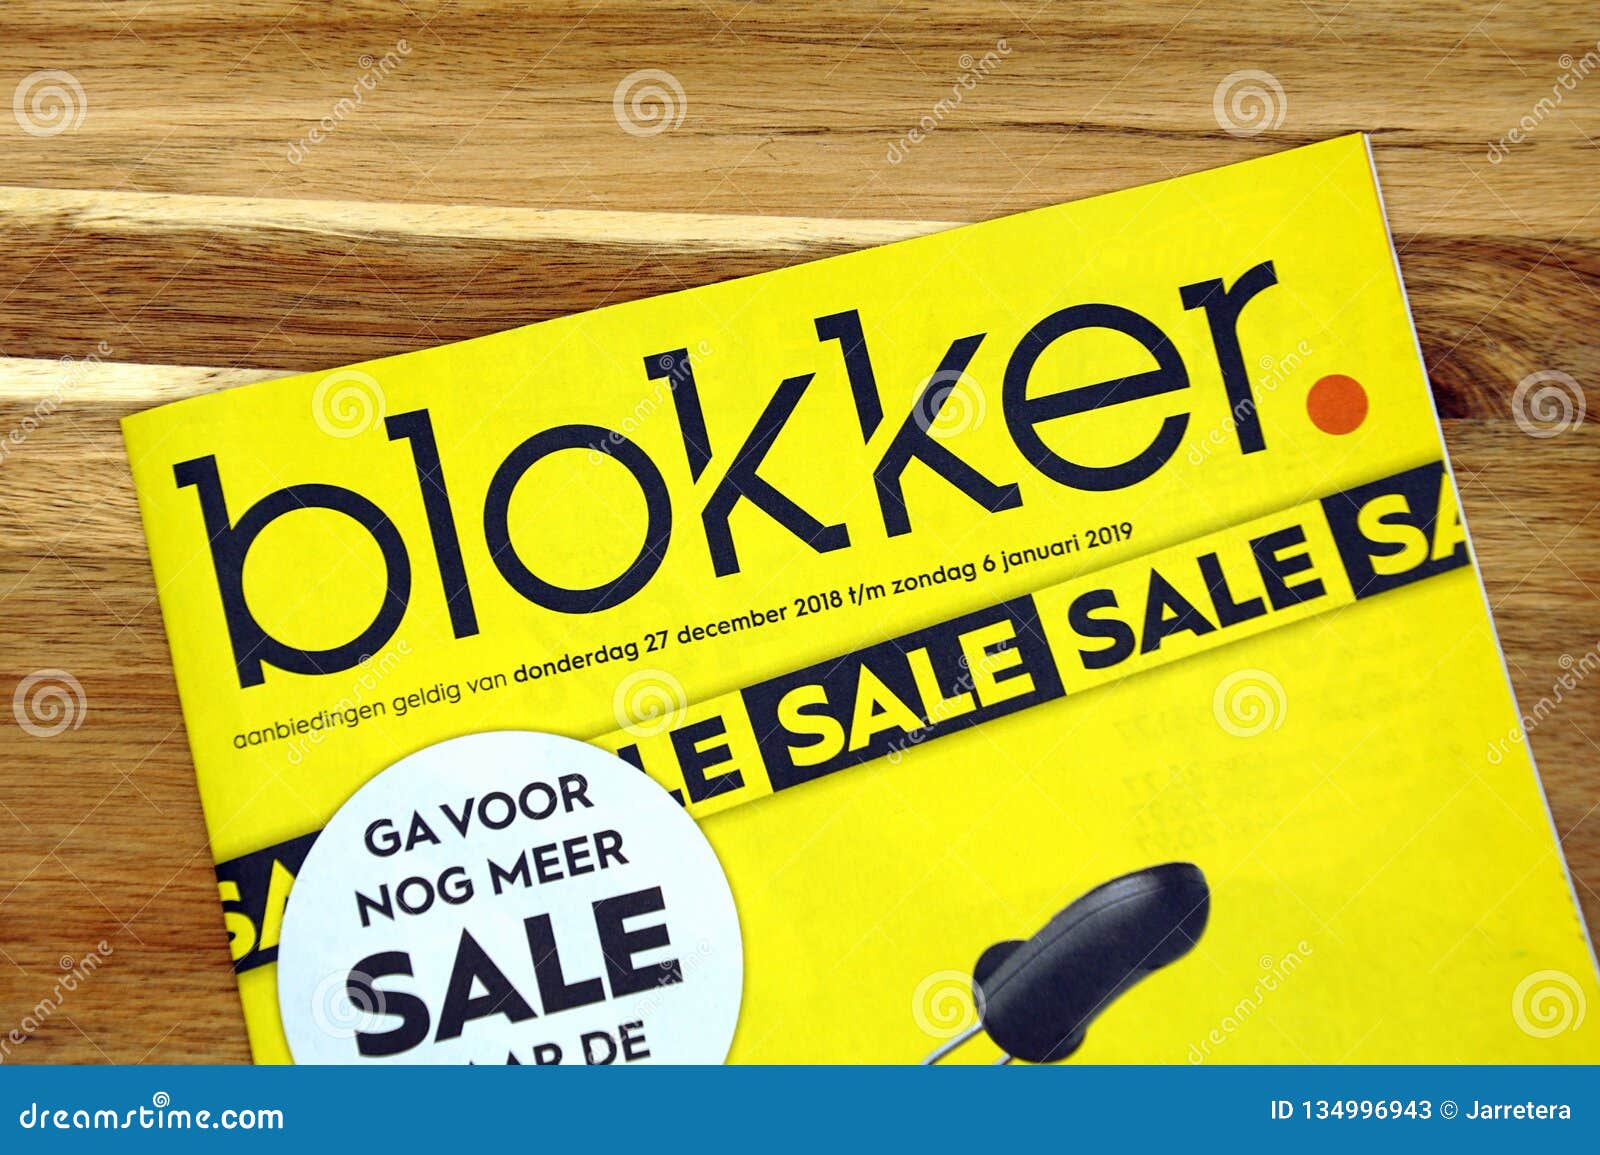 Injectie Kers salaris Goods Store Sale Flyer of Dutch Retail Chain Blokker. Editorial Stock Photo  - Image of advertising, communication: 134996943